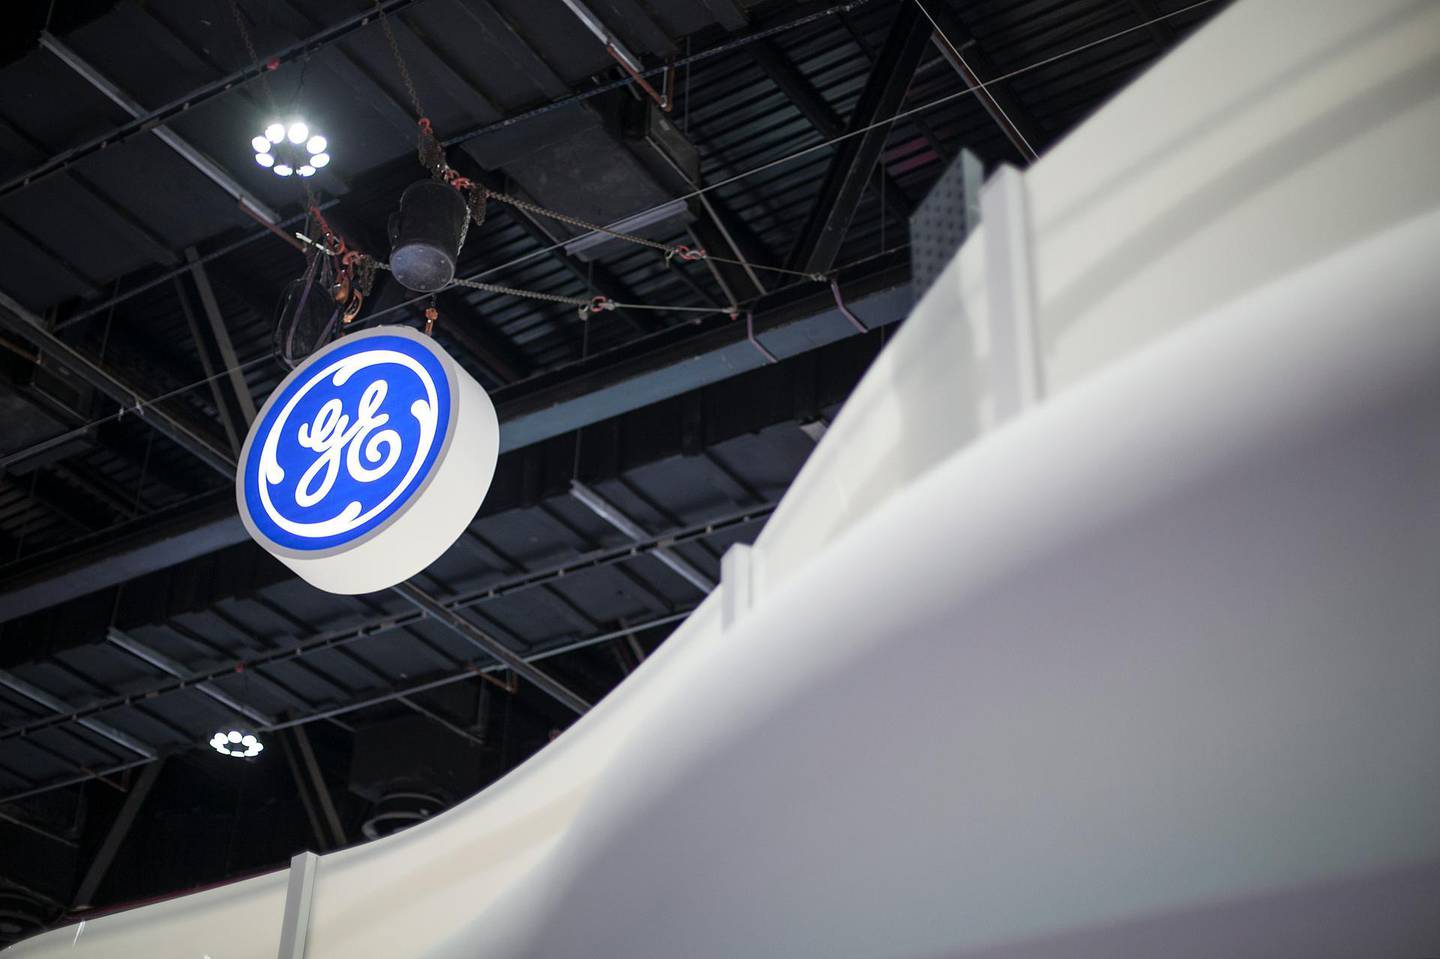 Abu Dhabi, United Arab Emirates. November 7, 2016///

GE, General Electric oil and gas's logo. ADIPEC, Day 1. Abu Dhabi, United Arab Emirates. Mona Al Marzooqi/ The National 

ID: 56905
Reporter: LeAnne, Tony, and Dalia 
Section: Business 
 *** Local Caption ***  161107-MM-ADIPECday1-071.JPG